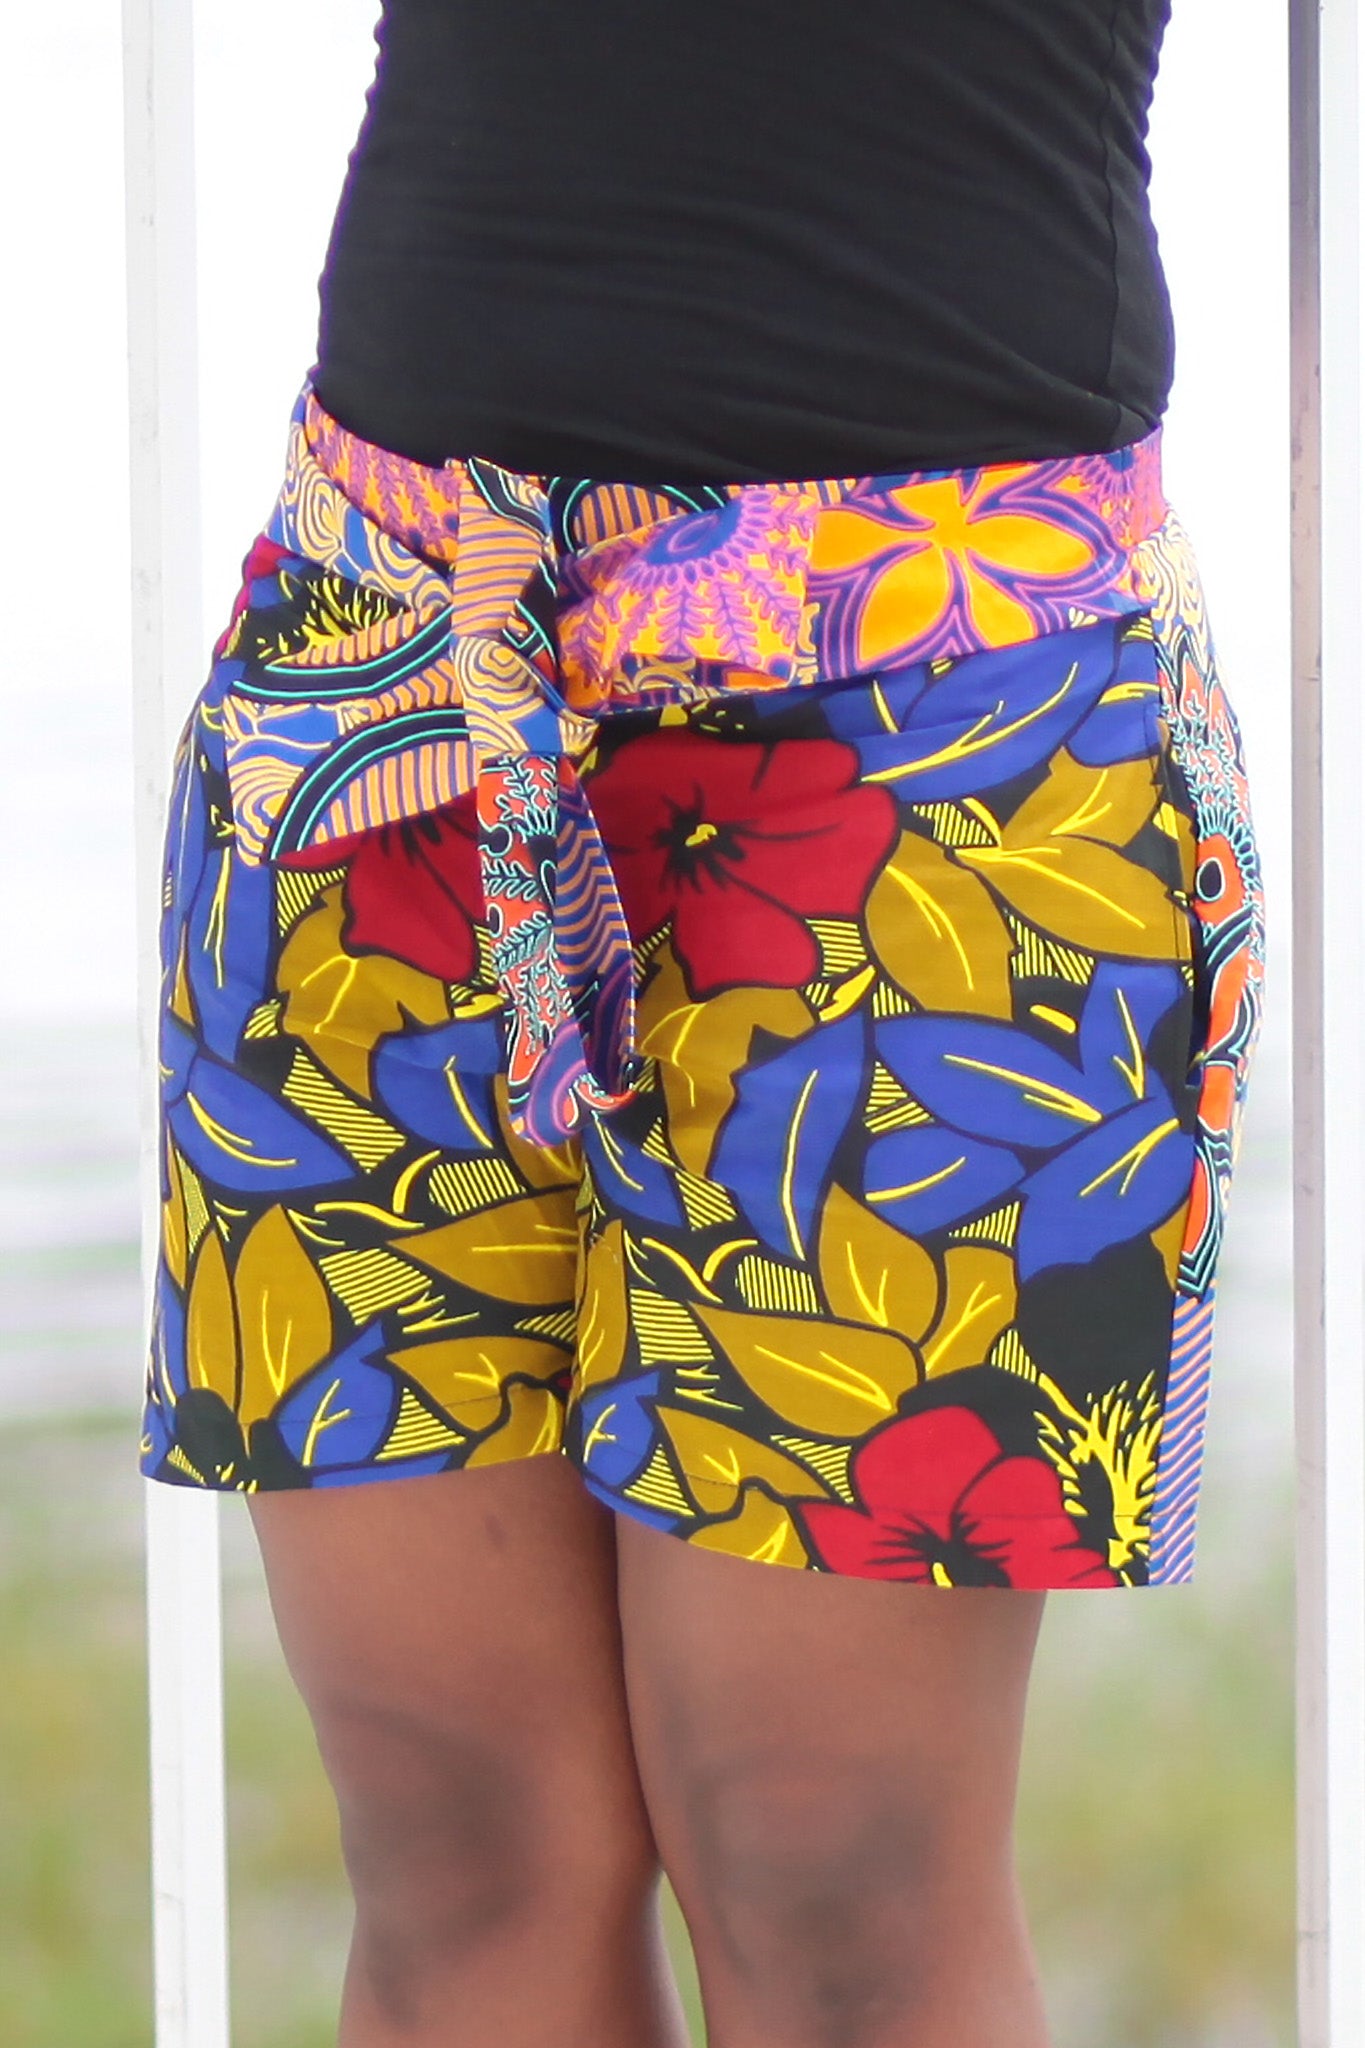 African Print/Kitenge  Beach Shorts-Red/Blue/Gold Double Sided Shorts Geometric Flowers - Africas Closet